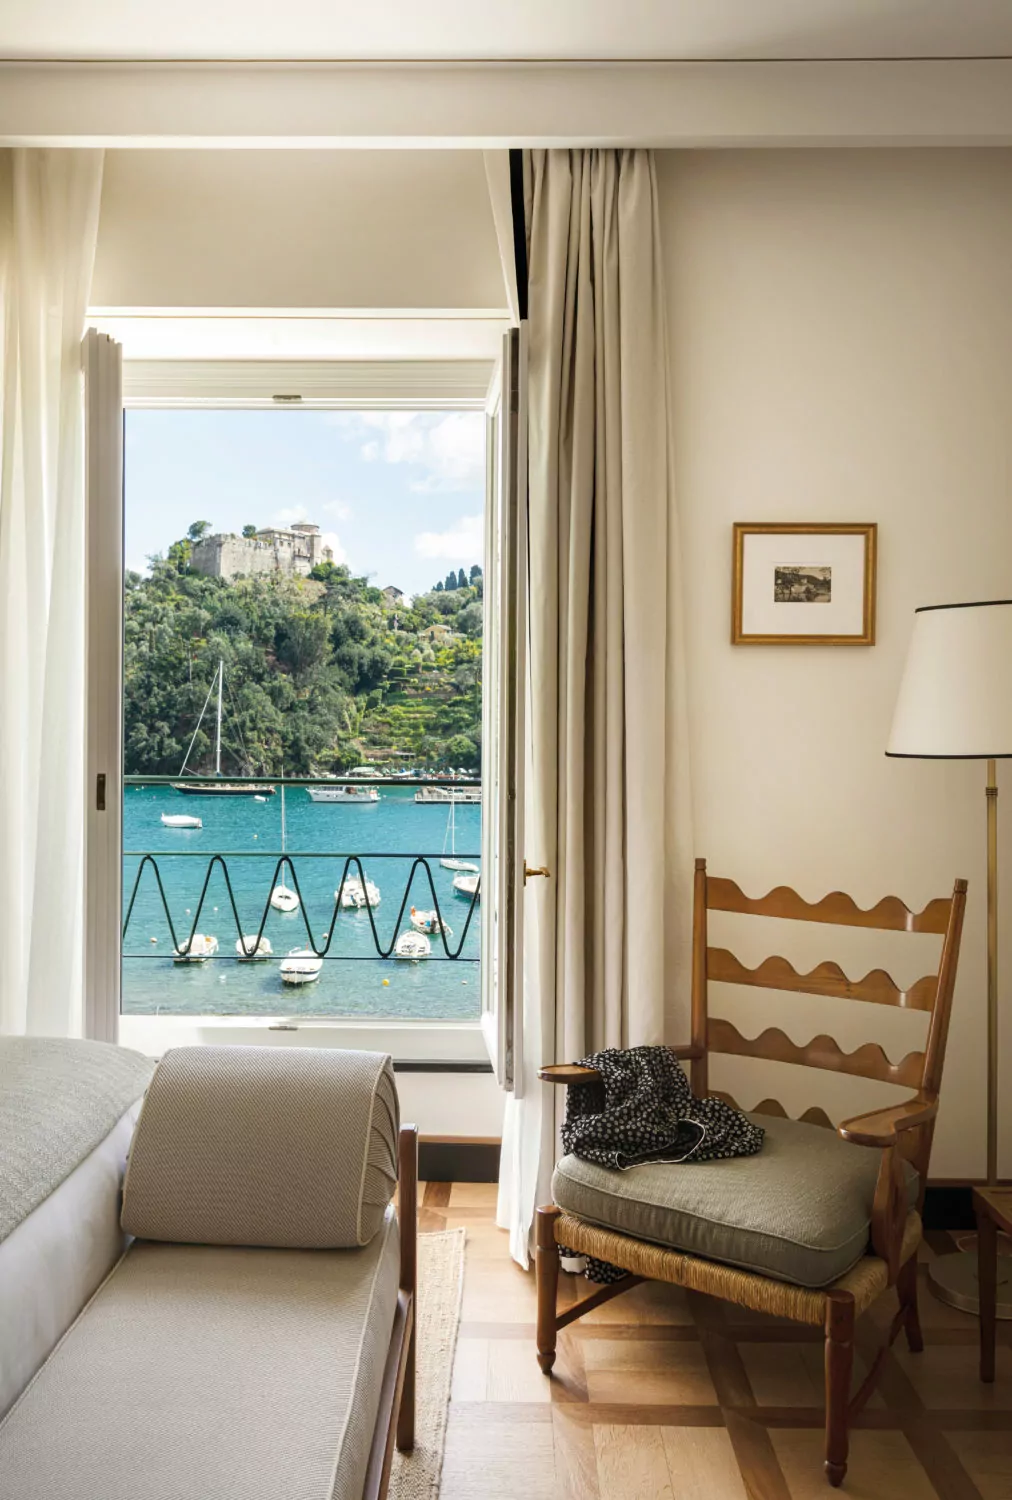 Inside the new-look spaces at Belmond's Splendido Hotel in